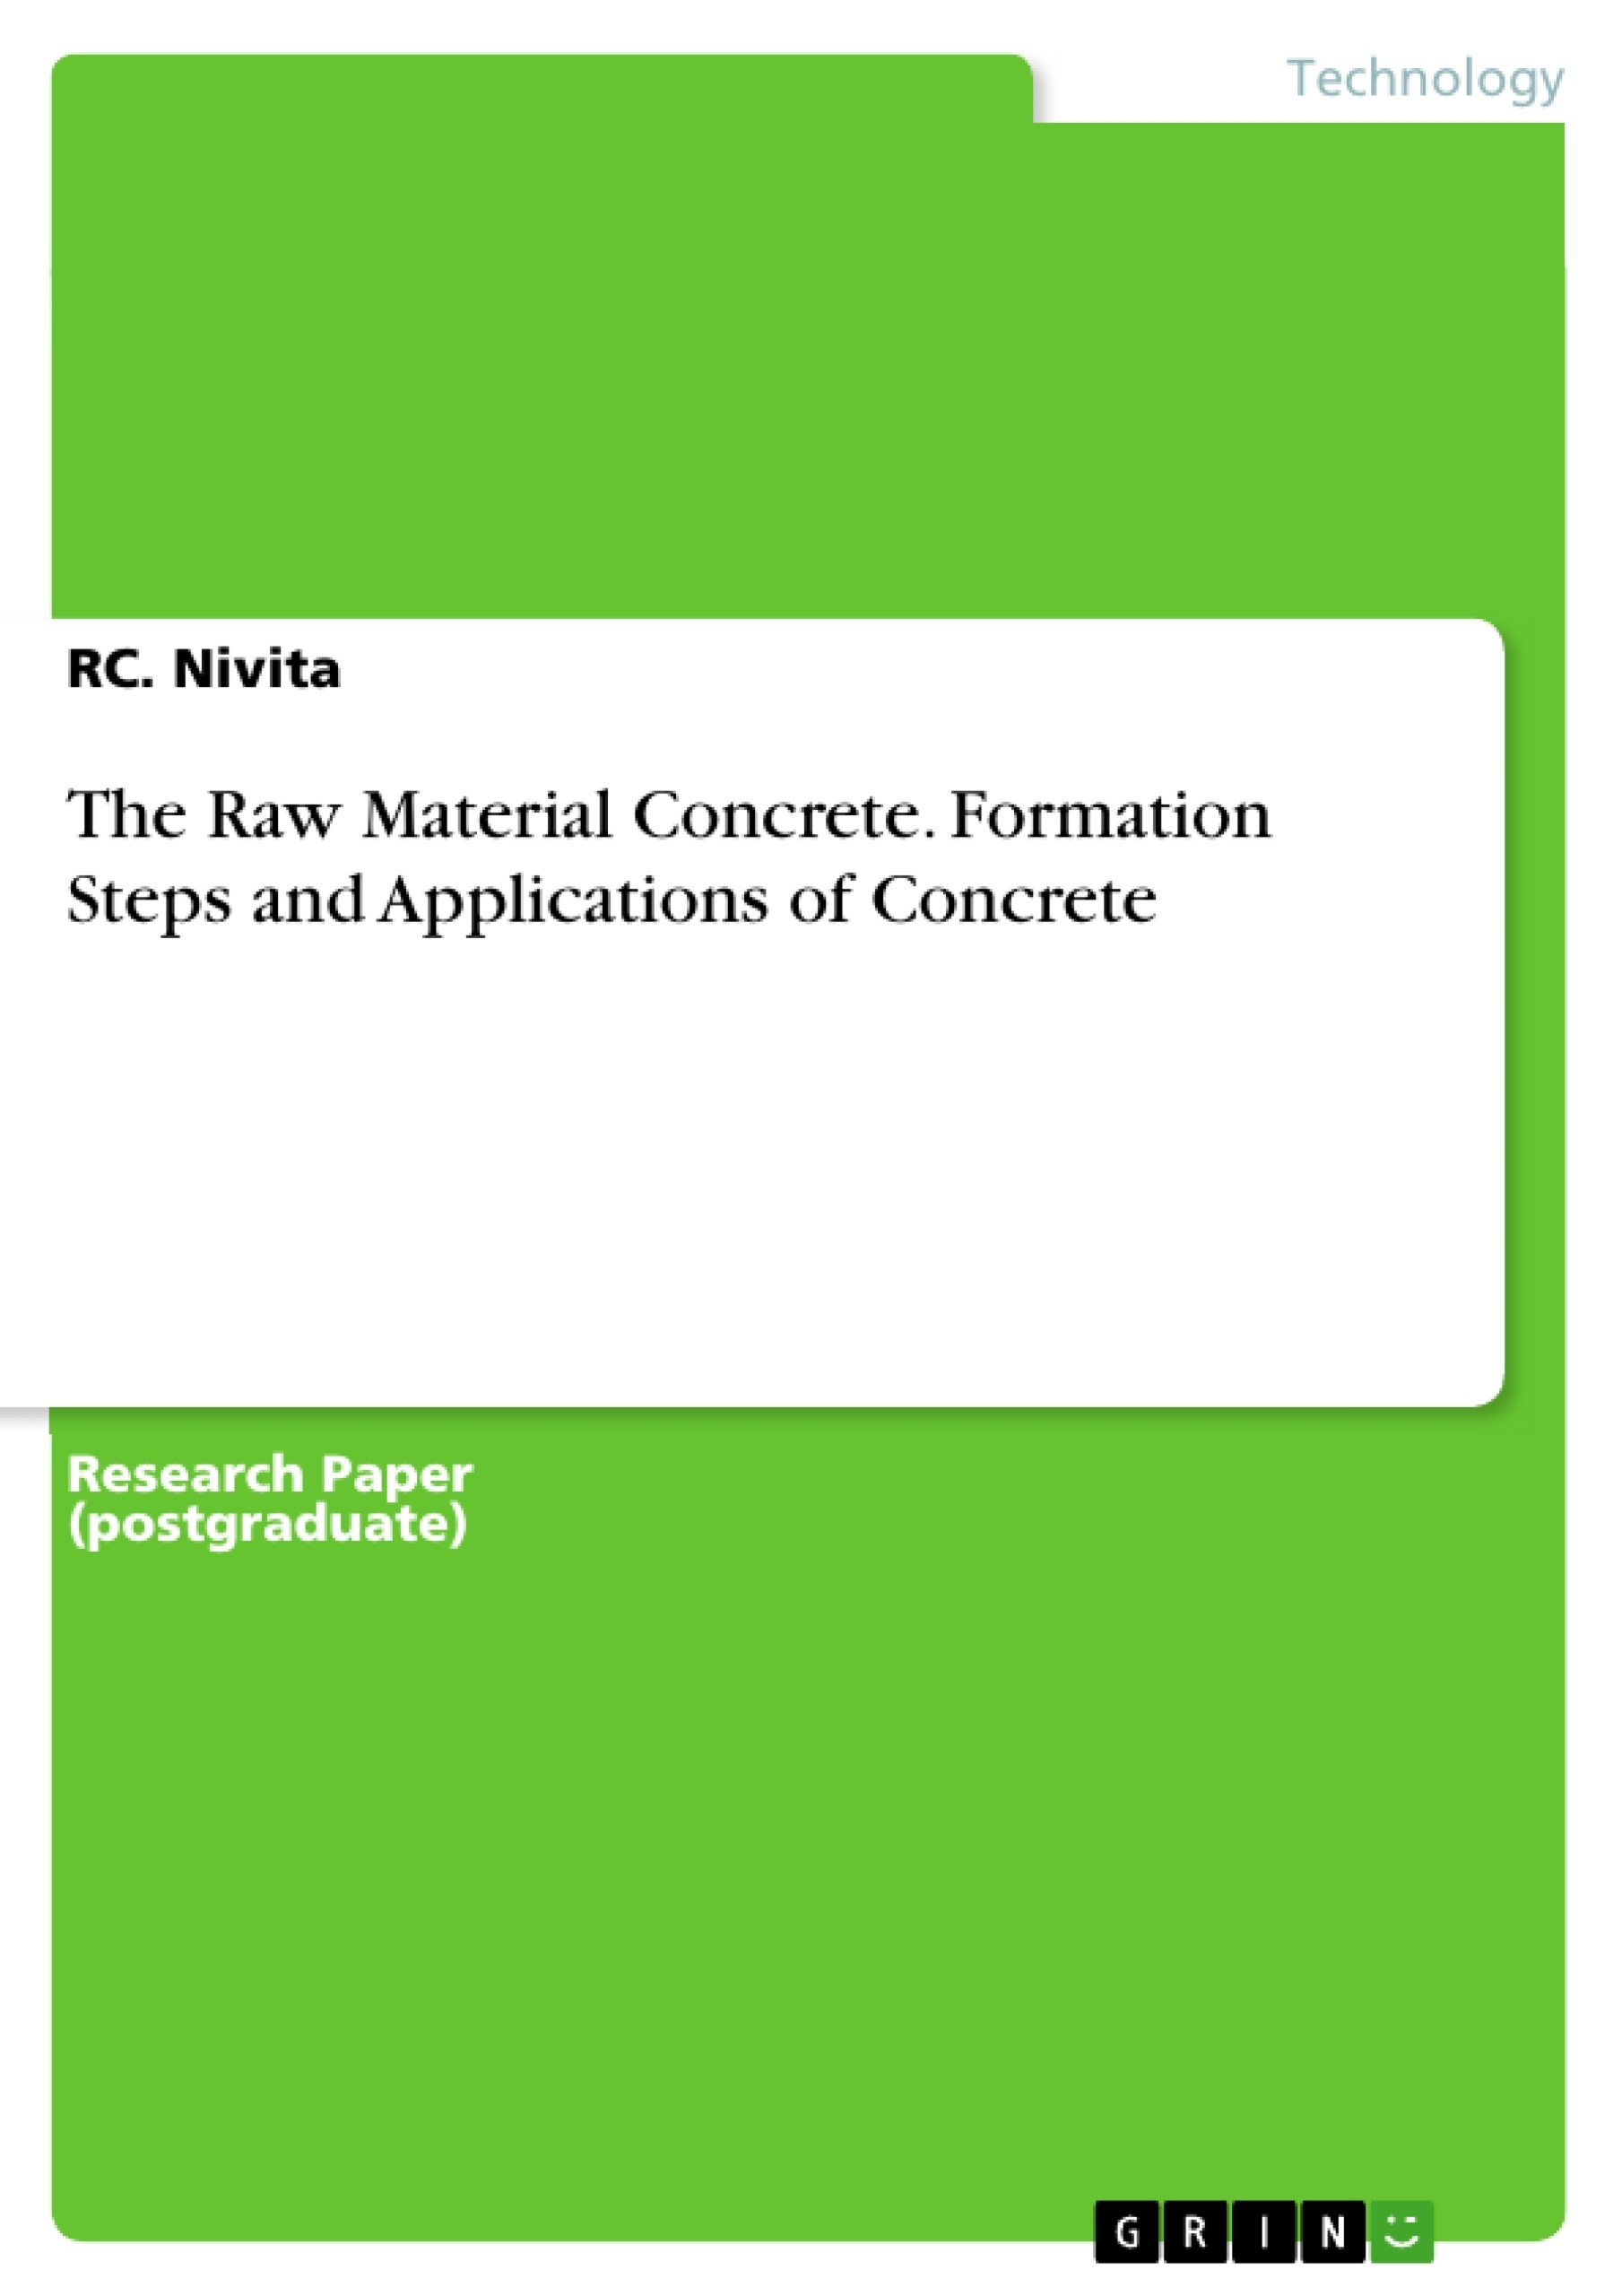 Title: The Raw Material Concrete. Formation Steps and Applications of Concrete